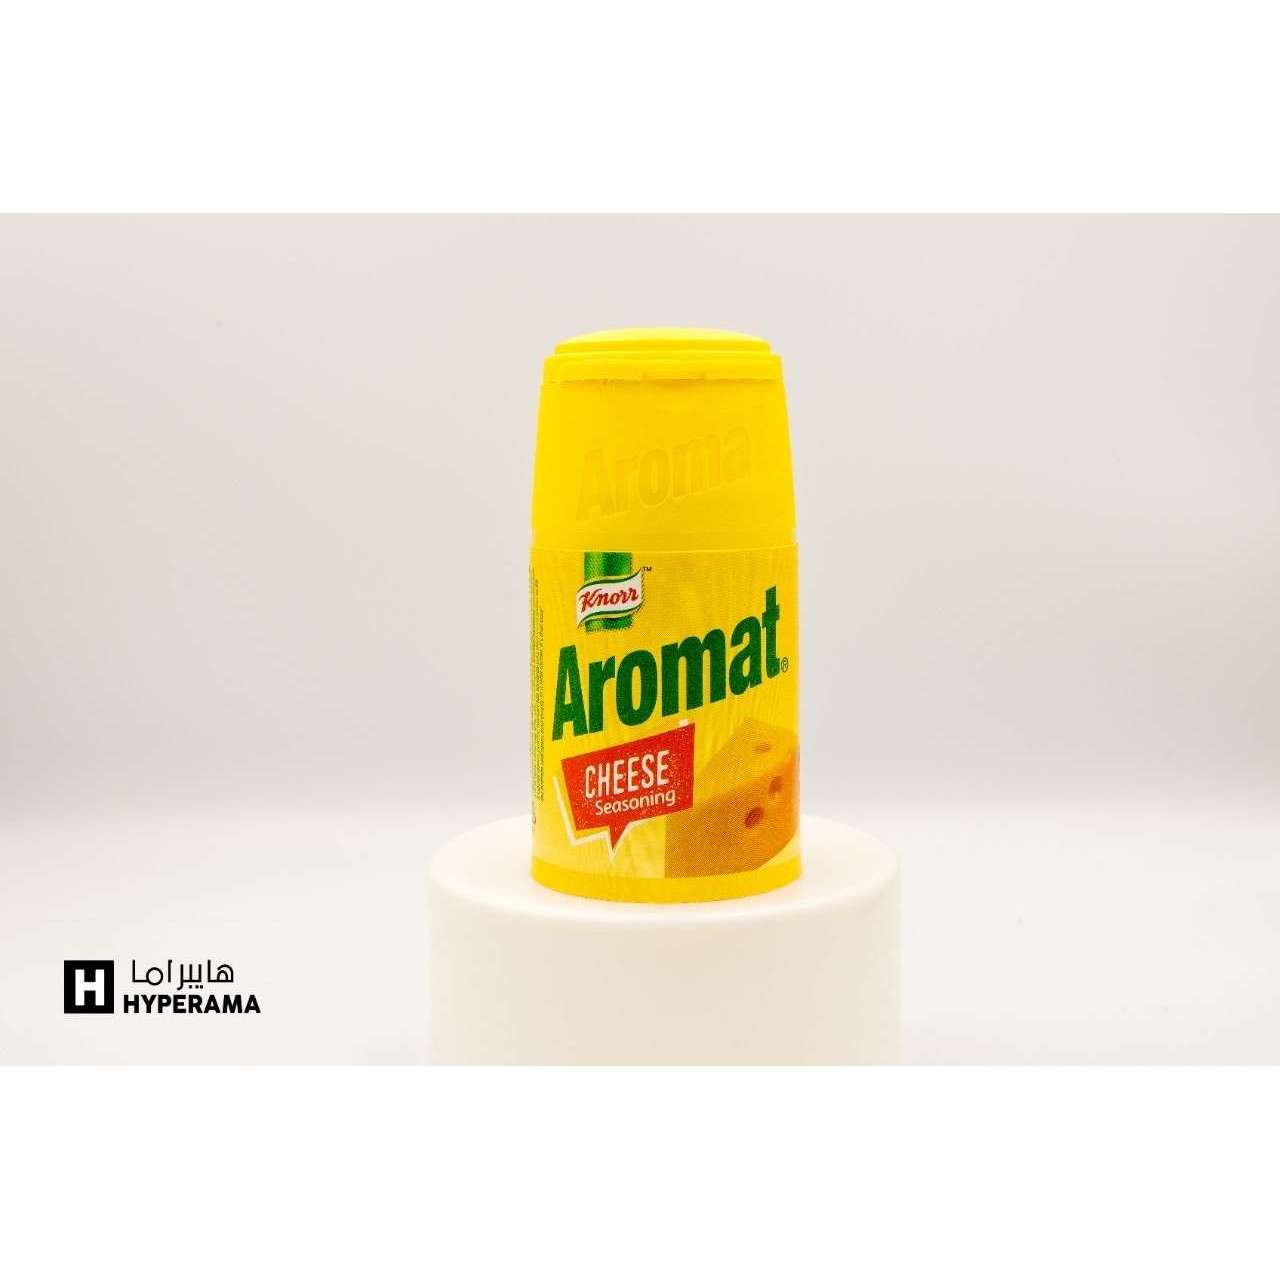 KNORR AROMAT CHEESE 75G CANNISTER